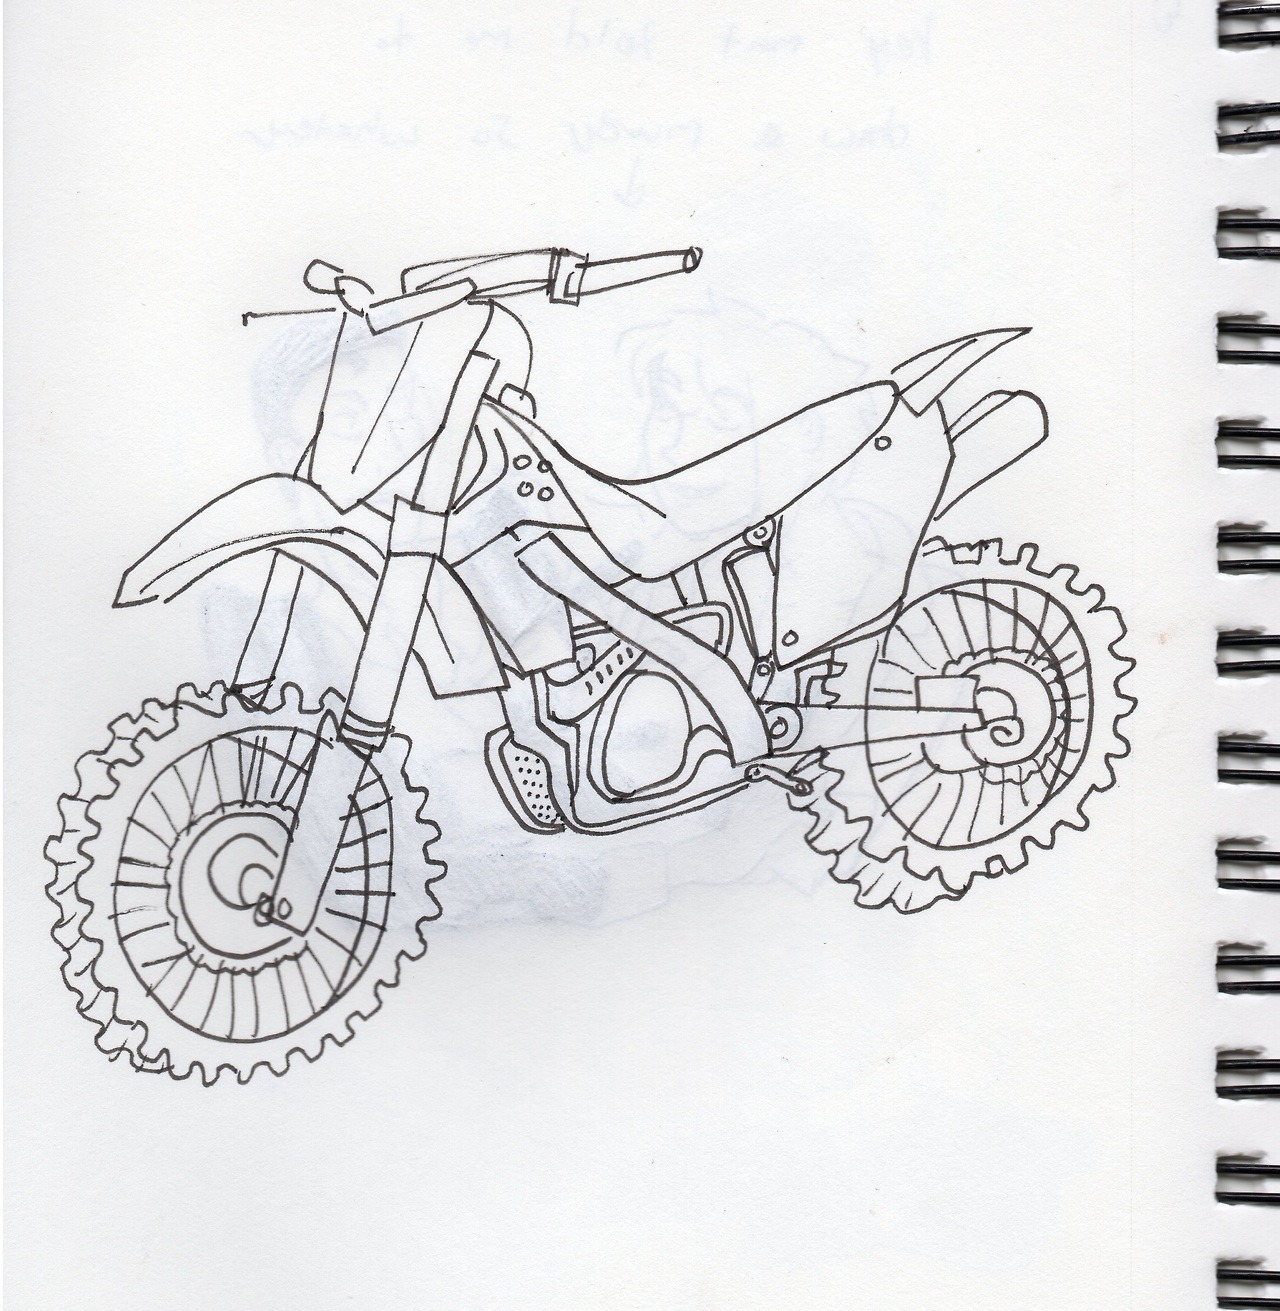 Some doodles of dirt bikes, I know I should draw...